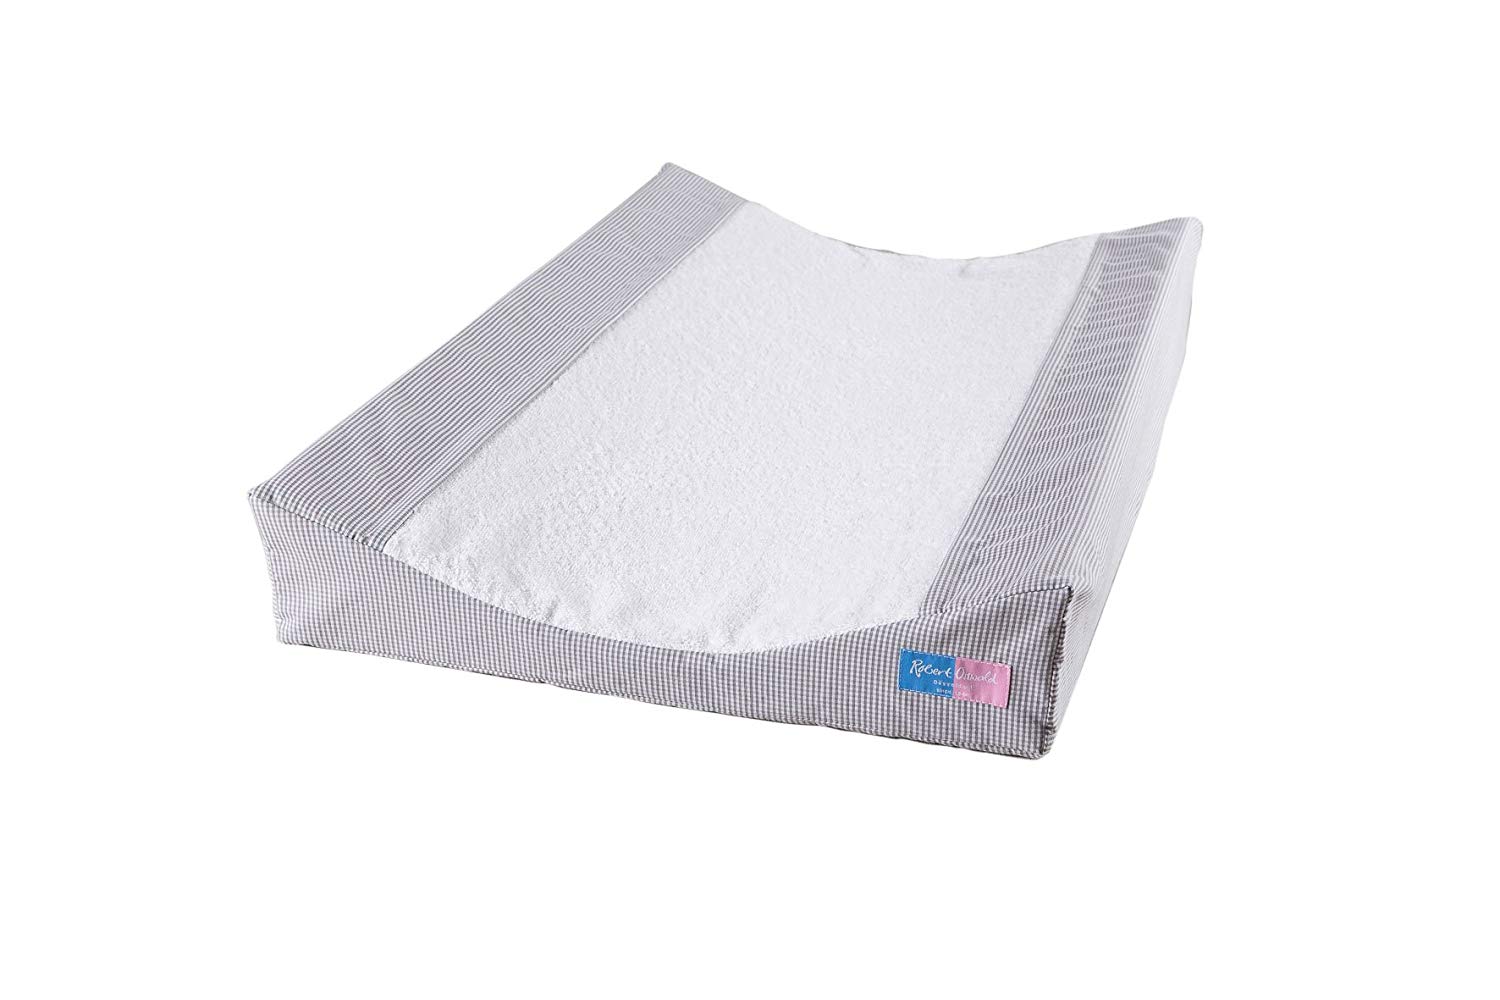 Robert Osswald 1.4.1.3.1.1-K05-01 Changing Mat with 2 Wedge Moulds with Terry Cloth Cover and Inlet 45 cm x 70 cm